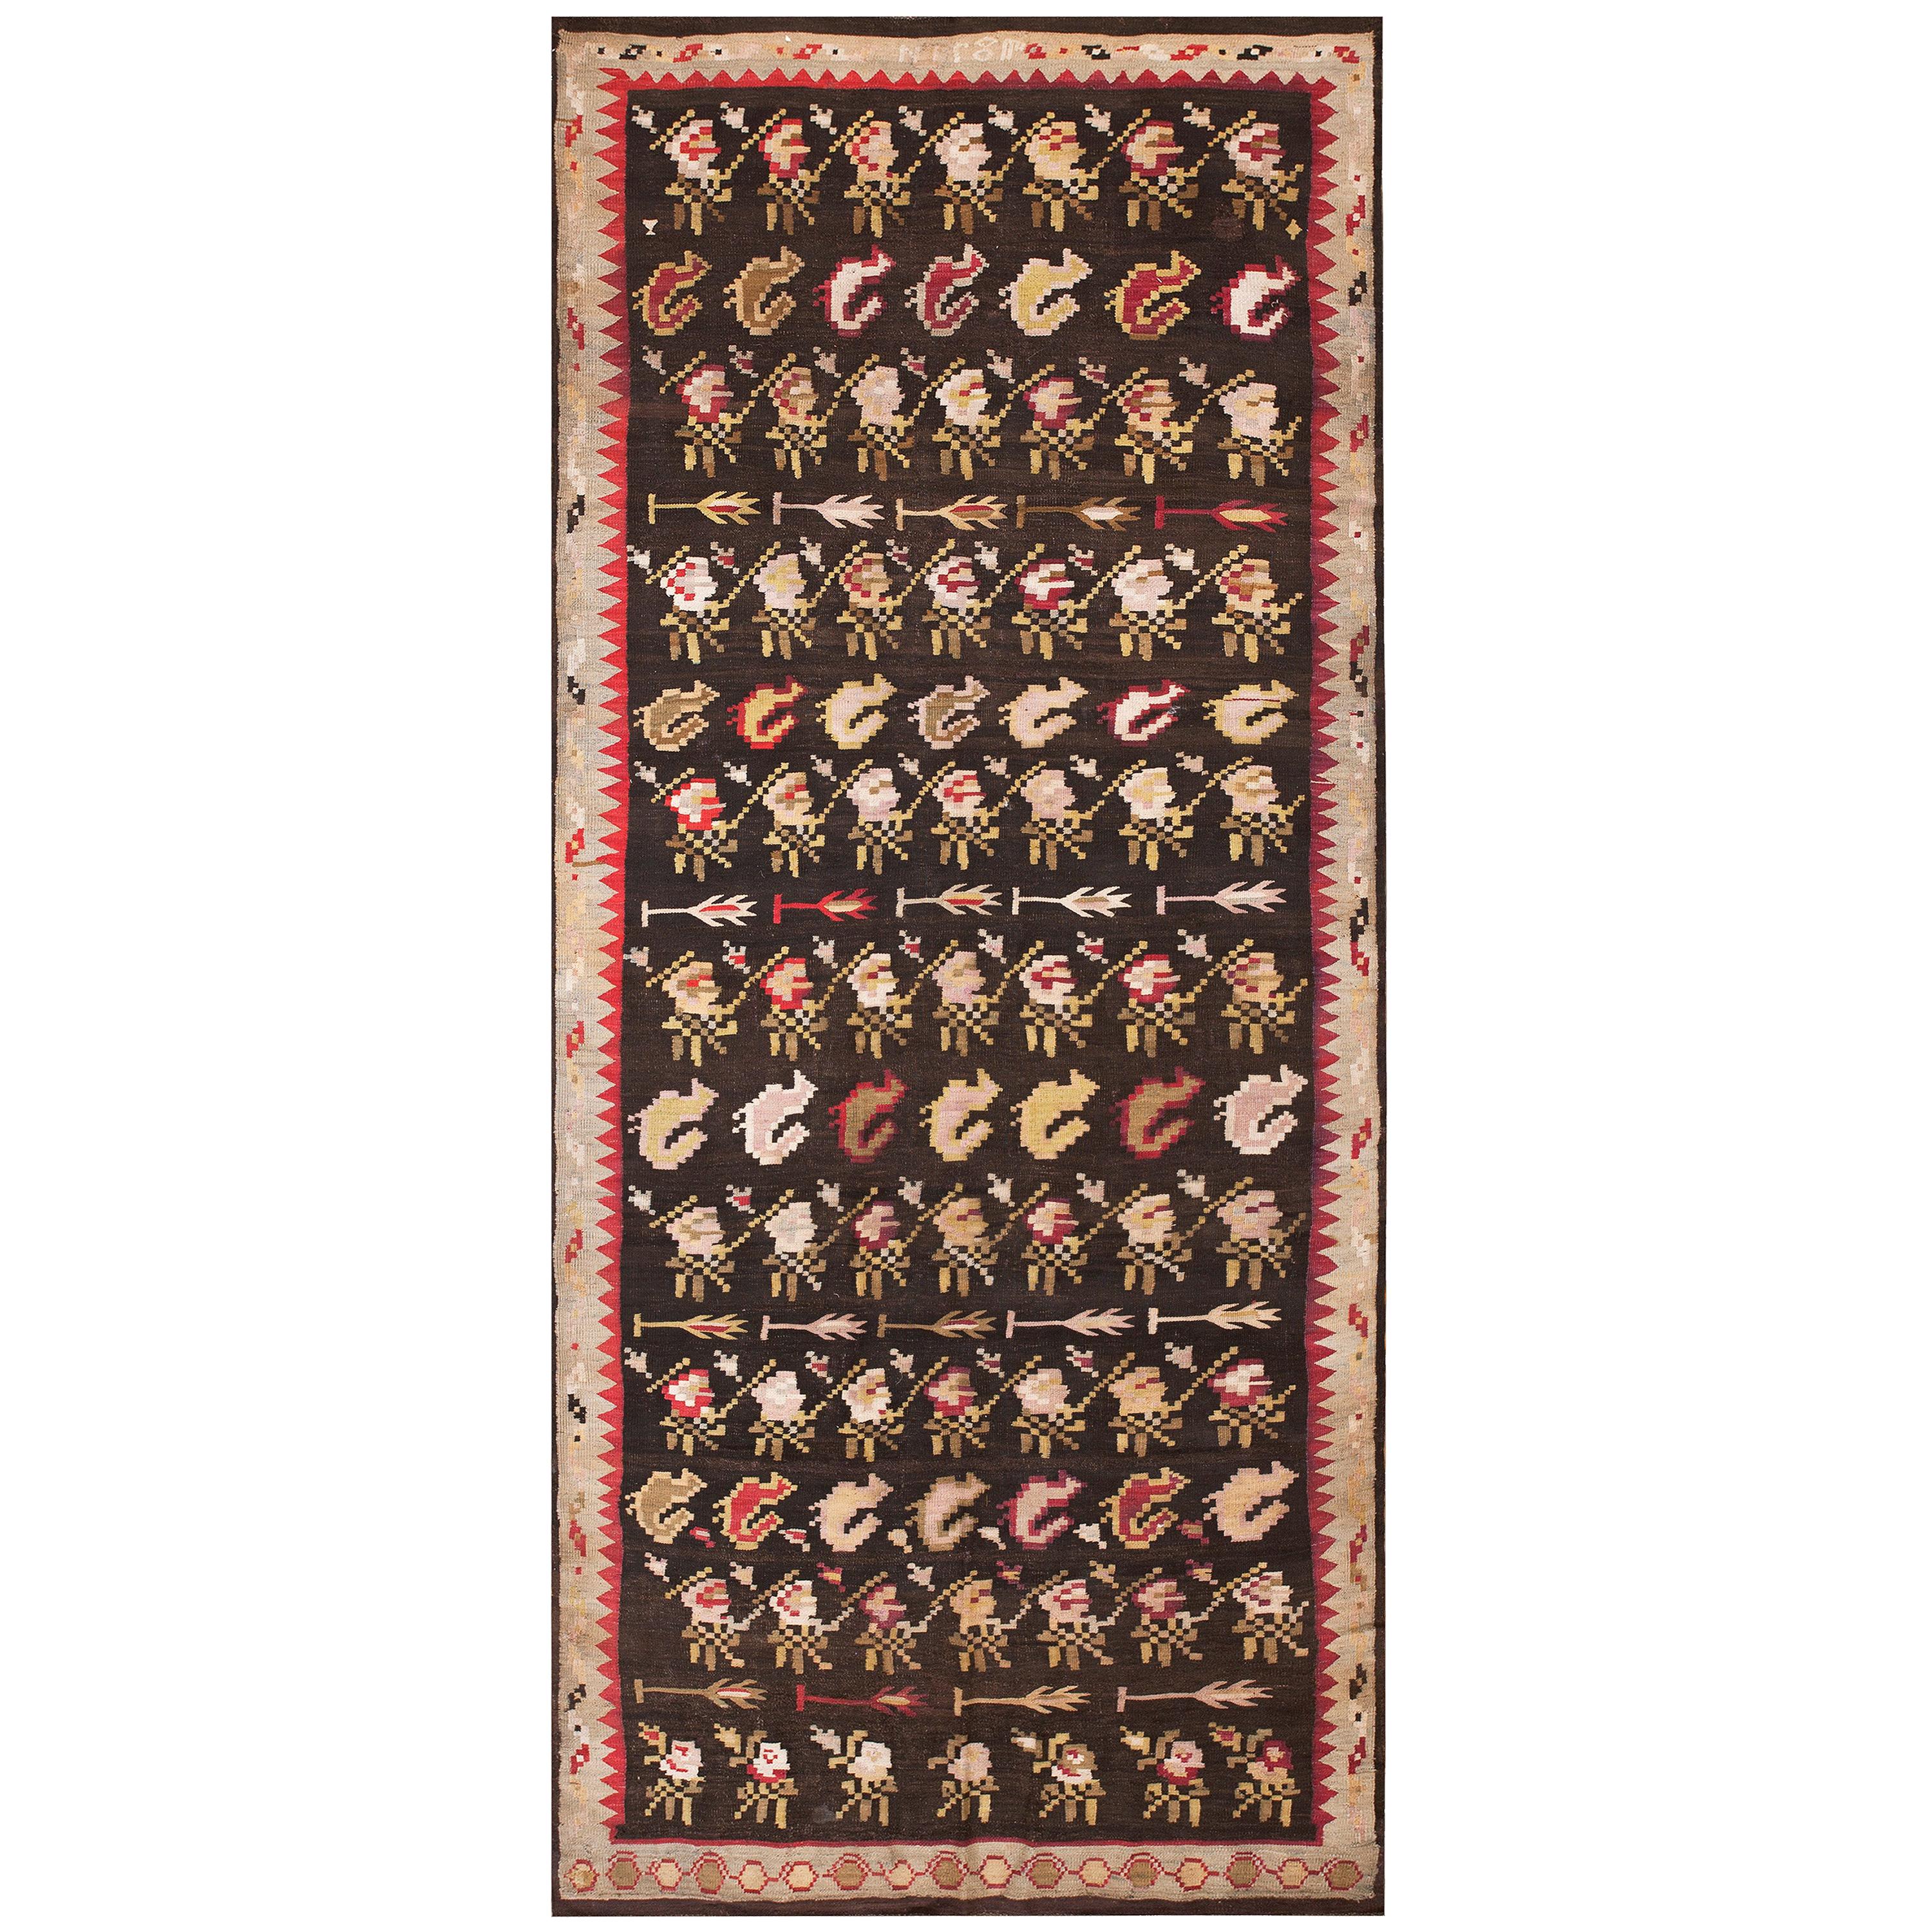 19th Century Besserabian Flat-Weave Dated 1871 ( 5' x 11'2" - 154 x 340 ) For Sale